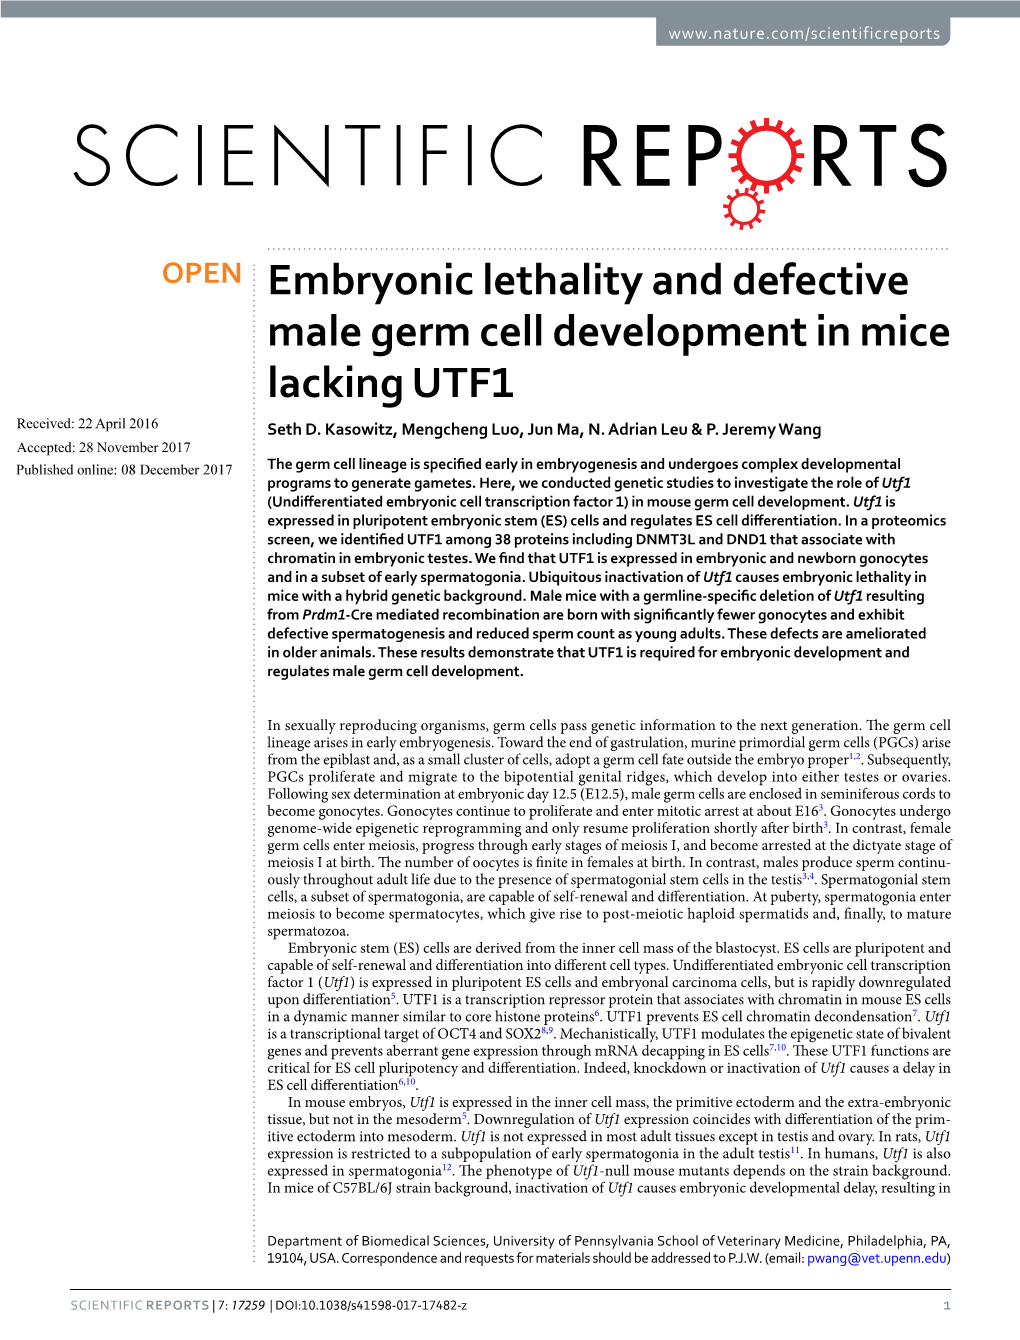 Embryonic Lethality and Defective Male Germ Cell Development in Mice Lacking UTF1 Received: 22 April 2016 Seth D